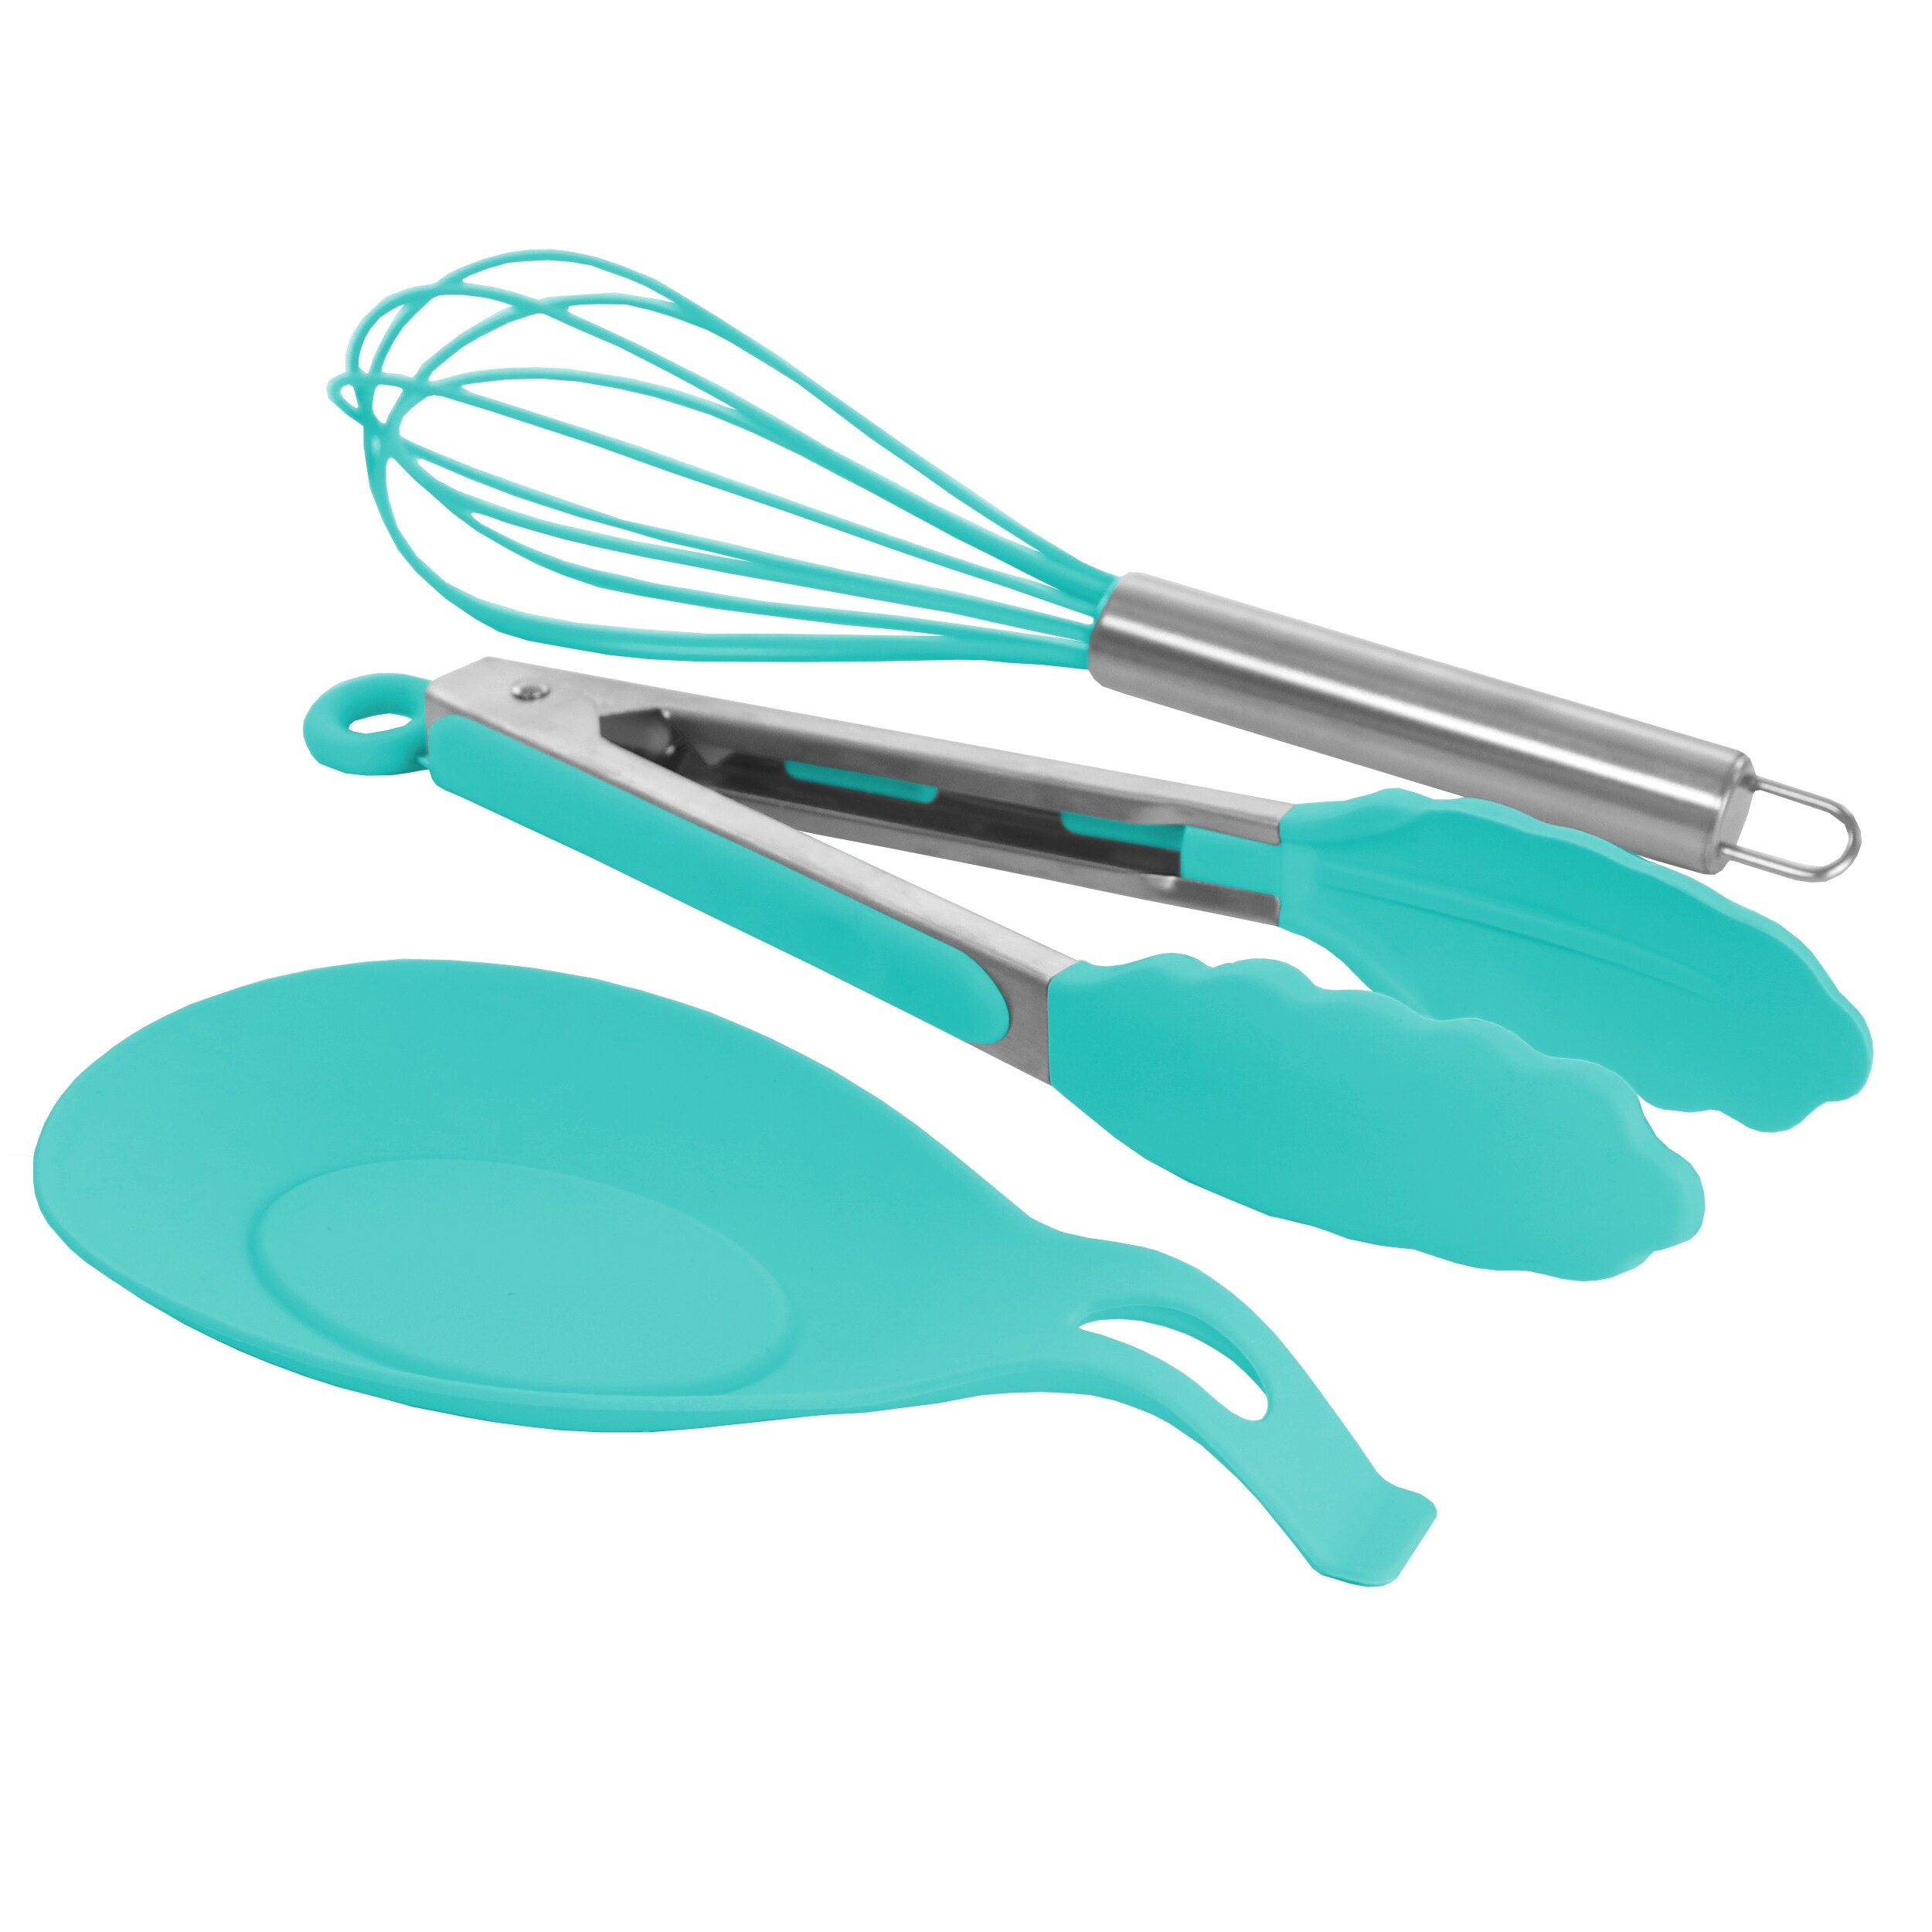 https://ak1.ostkcdn.com/images/products/is/images/direct/4930795dbbe85adae8f420541807f090e214eb4c/MegaChef-12-Piece-Silicone-Kitchen-Utensil-Set-in-Light-Teal.jpg